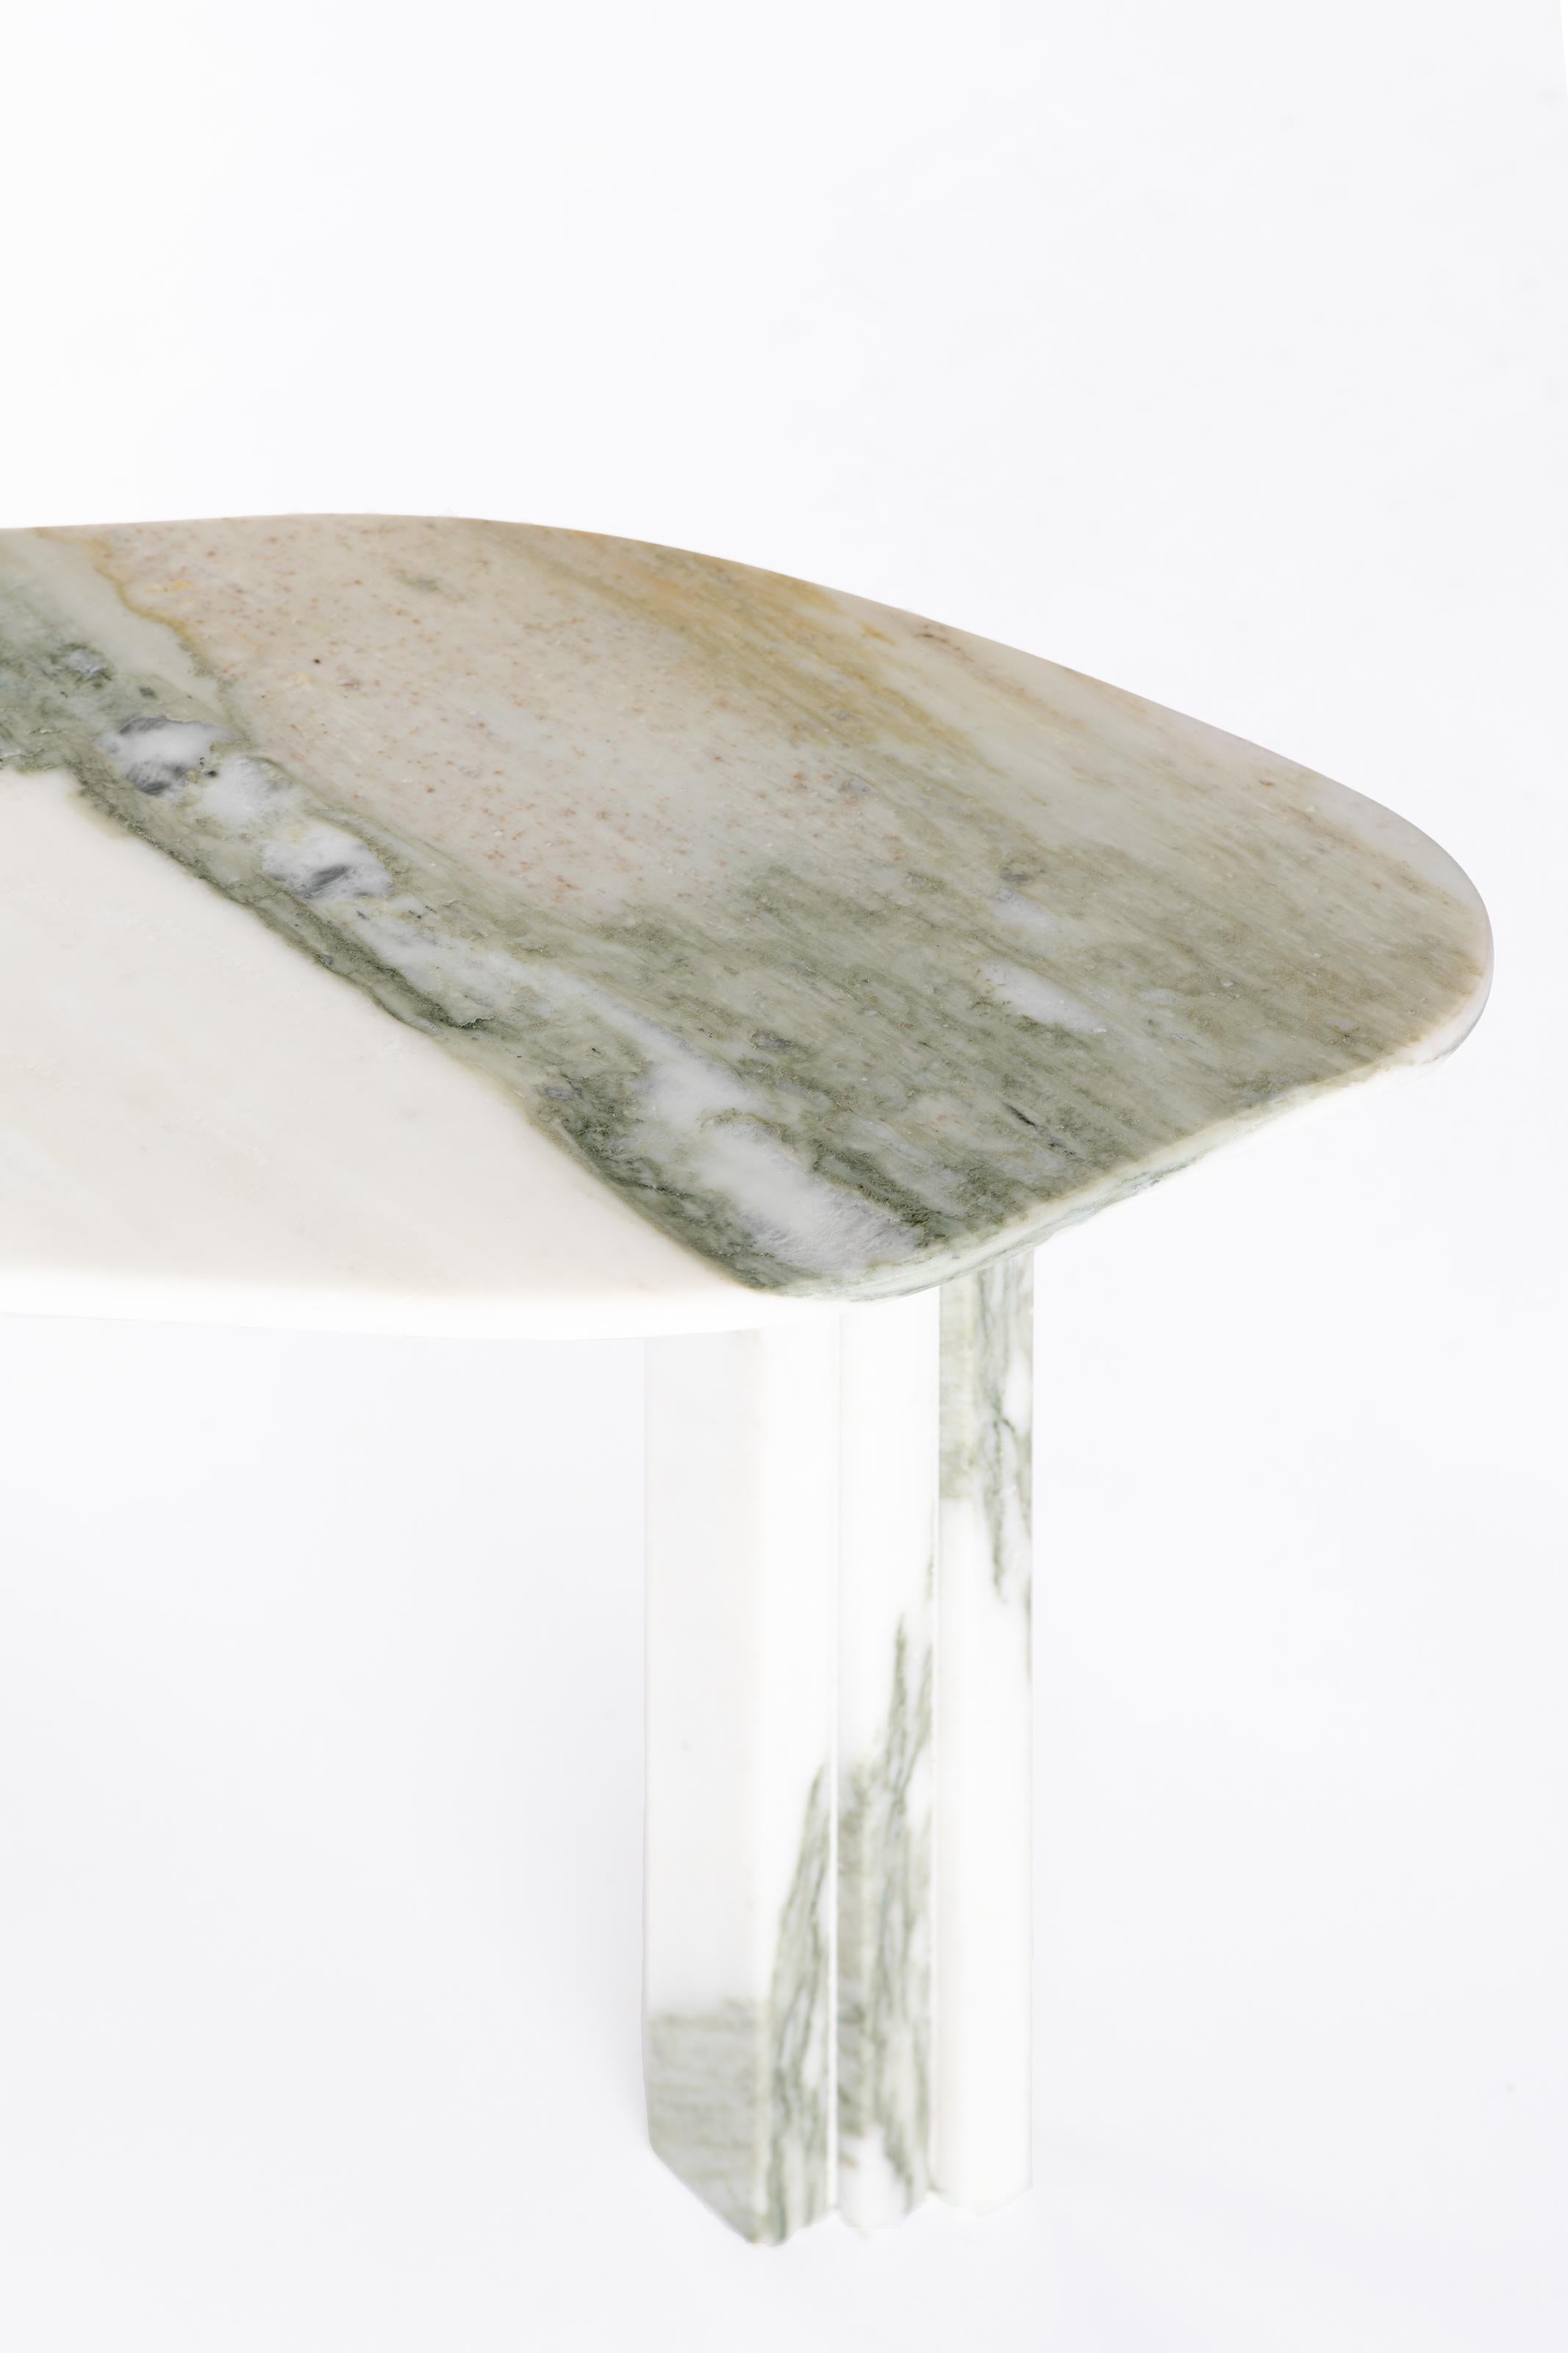 Organic Modern Bicolor Sculptural Dining Marble Table Signed by Lorenzo Bini